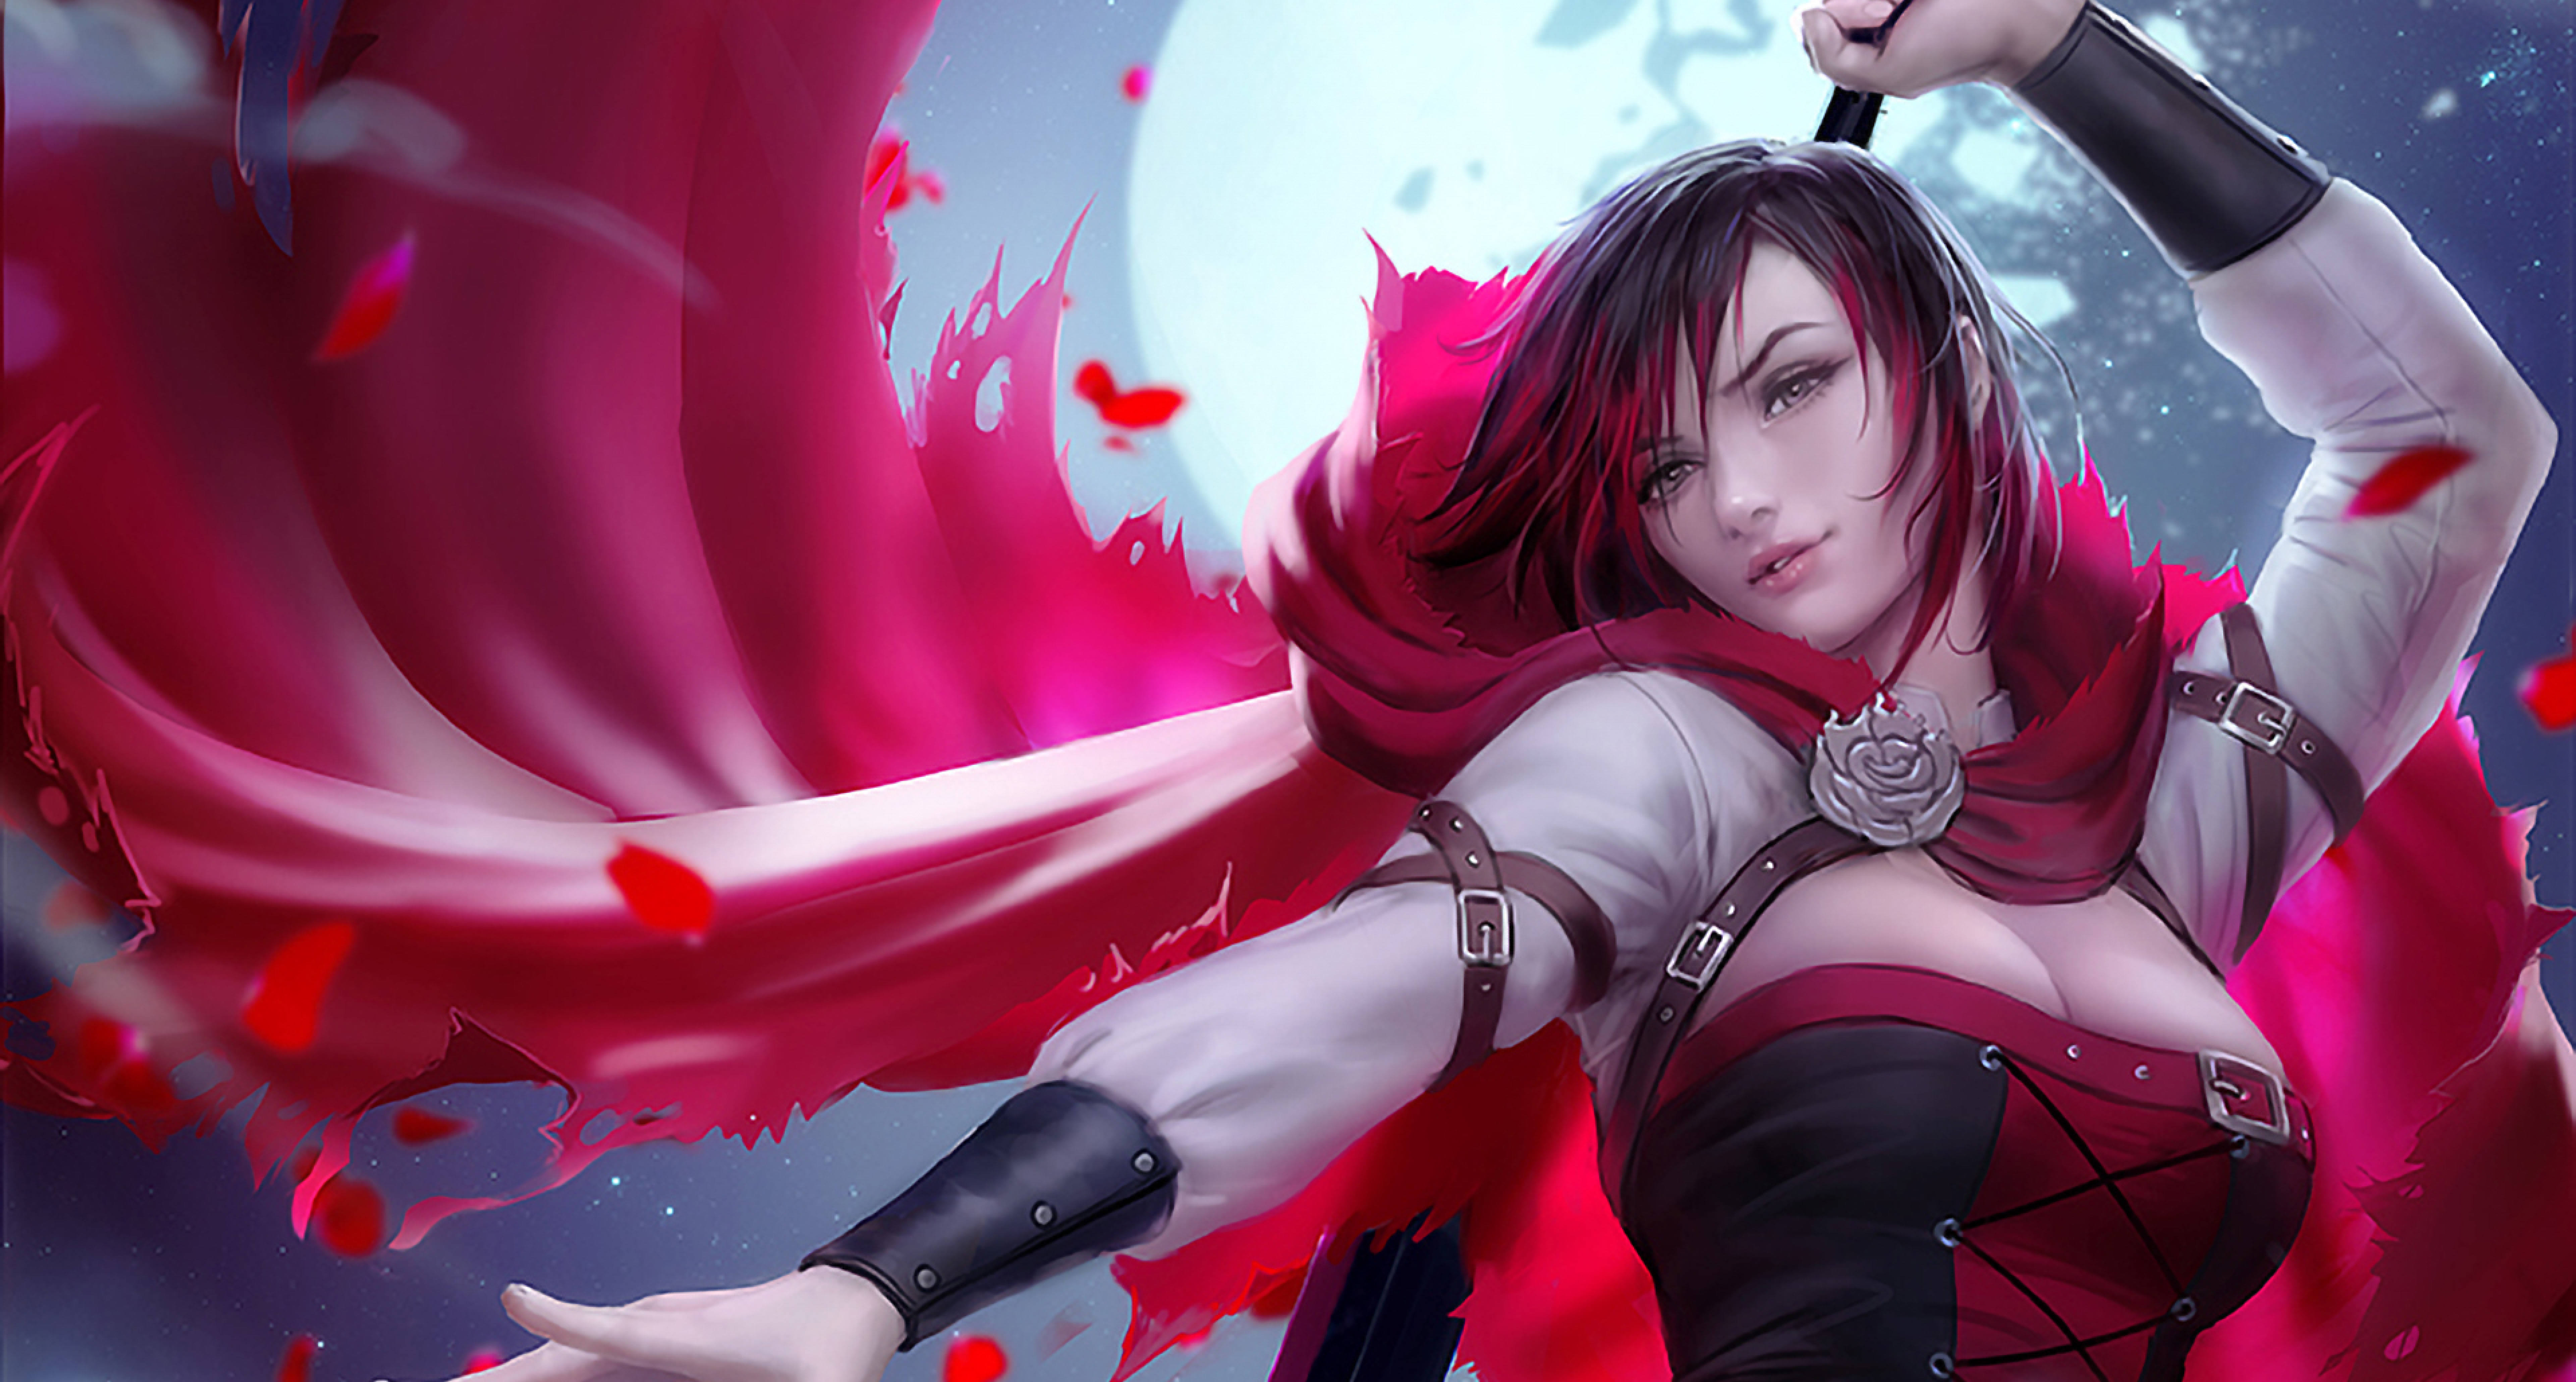 Desktop Wallpaper Ruby Rose Anime Girl Rwby Looking Up Hd Image  Picture Background 7941d9